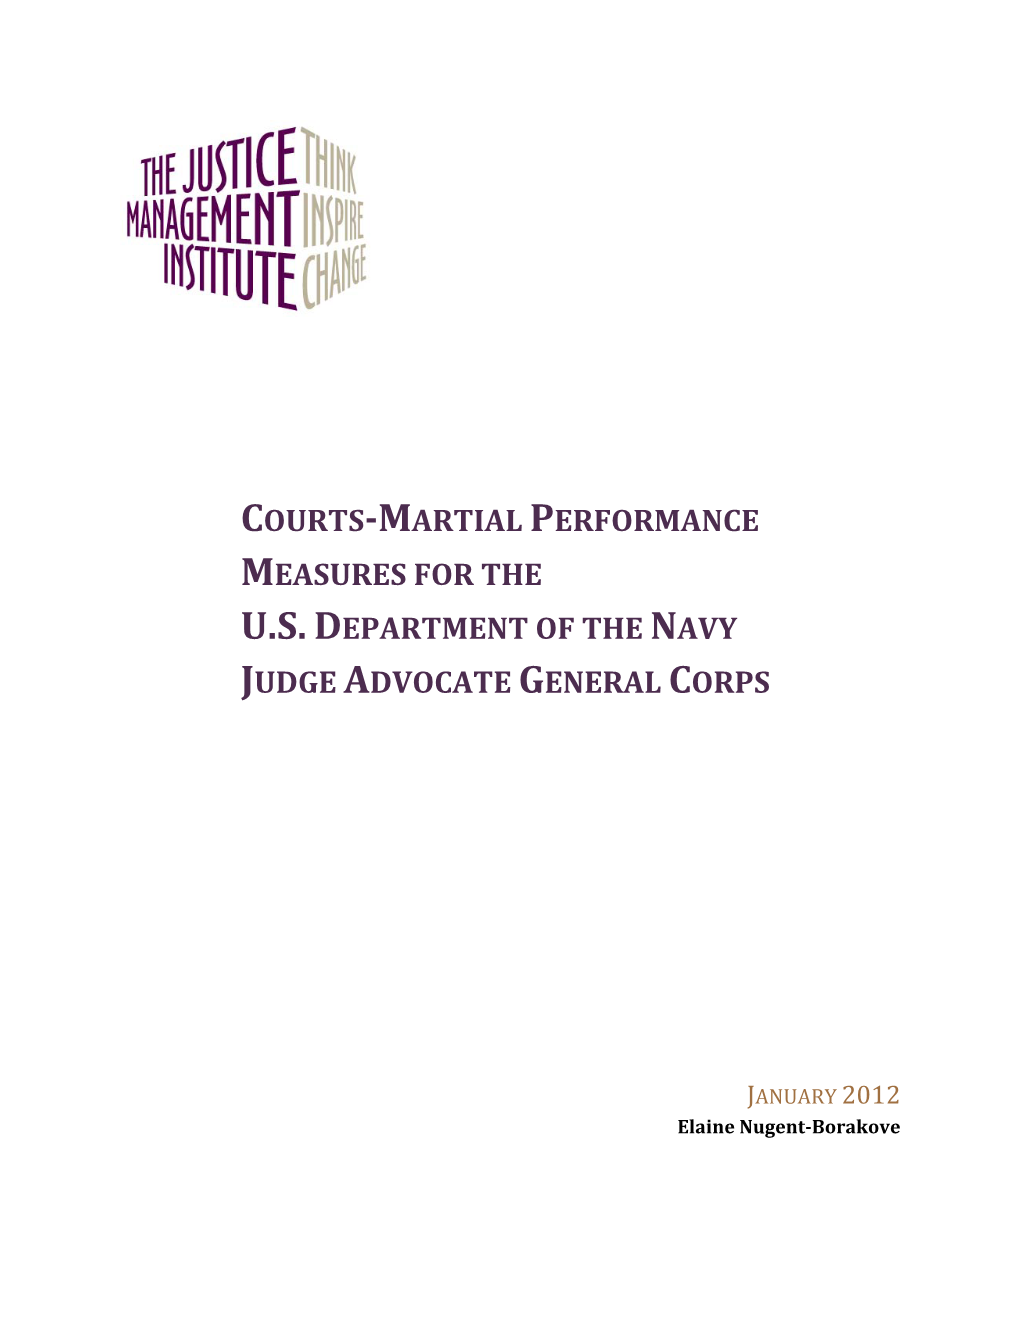 Courts-Martial Performance Measures for the Usdepartment of the Navy